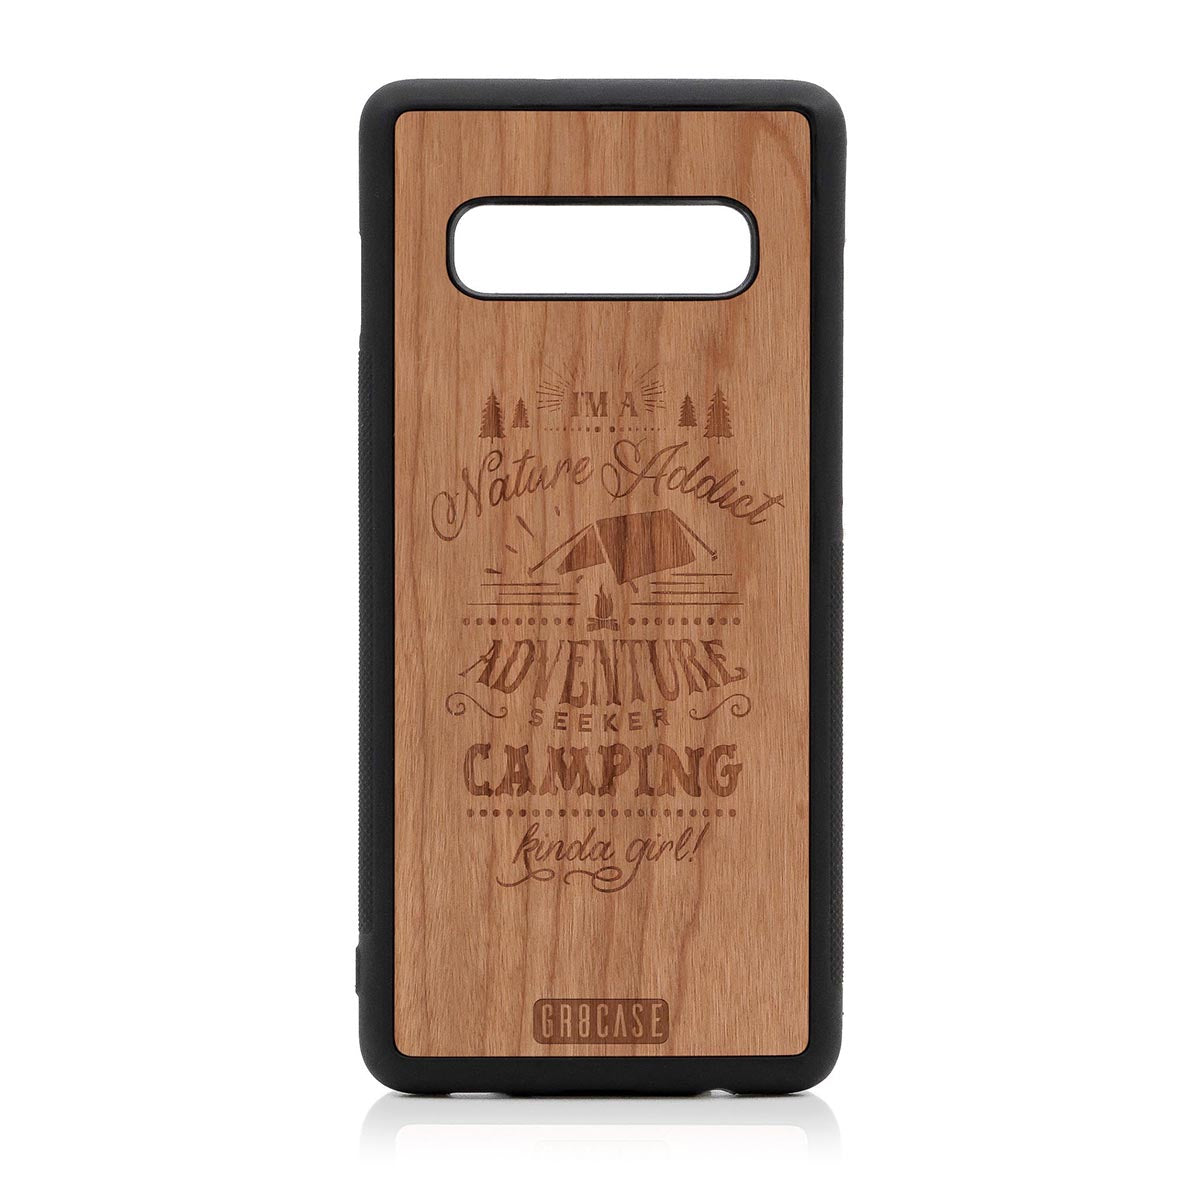 I'm A Nature Addict Adventure Seeker Camping Kinda Girl Design Wood Case Samsung Galaxy S9 Plus by GR8CASE